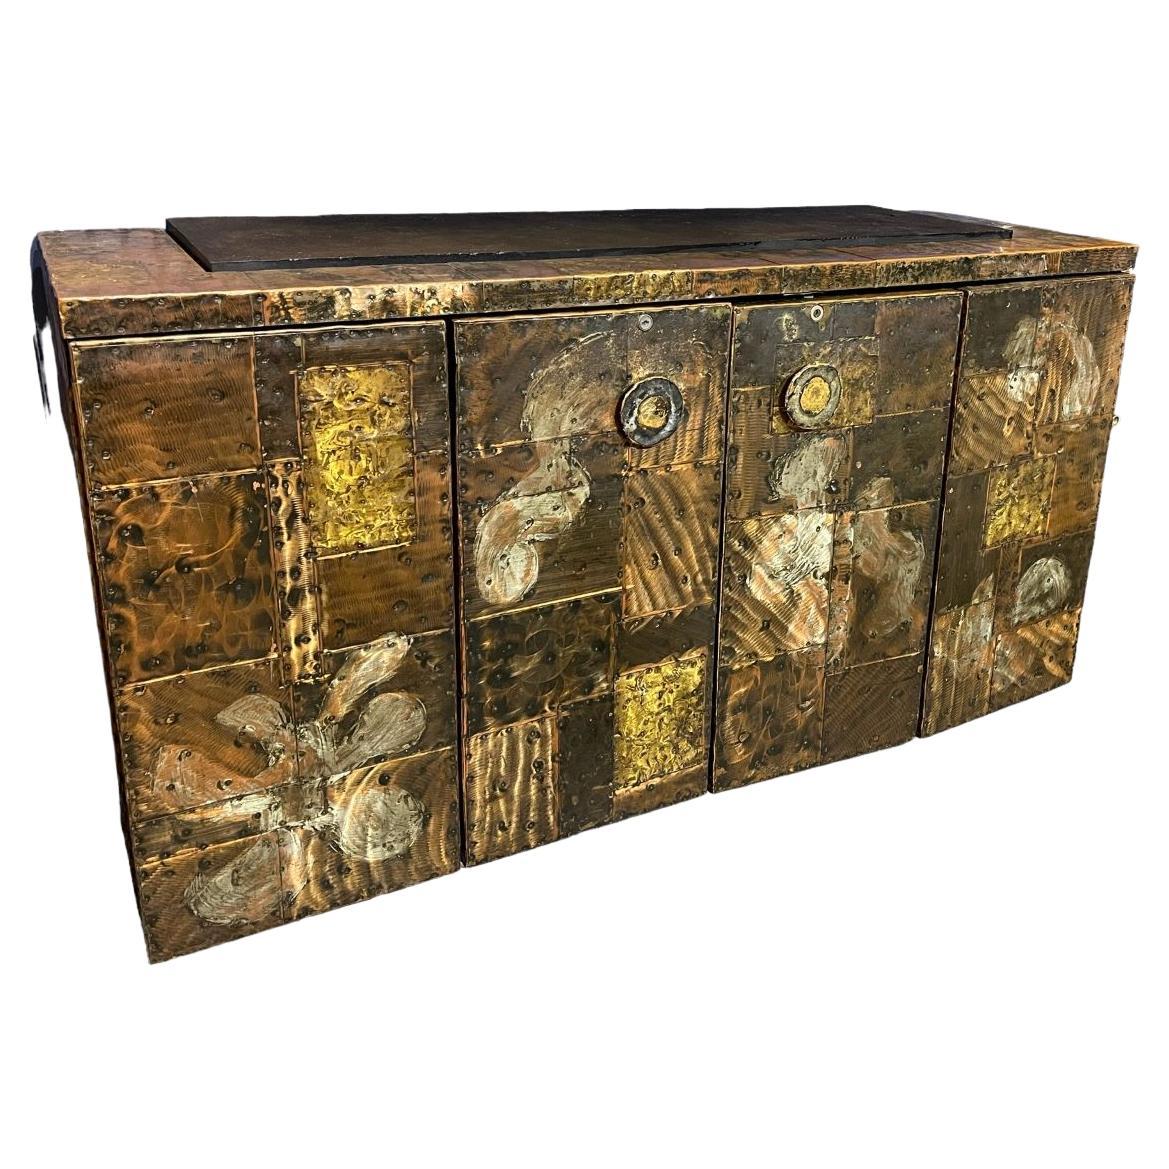  Stunning and rare copper clad wall mounted floating console/sideboard cabinet by Paul Evans for Directional, produced circa 1970. This incredible piece of design history is fabricated from patinized pieces of copper, brass, and pewter which have